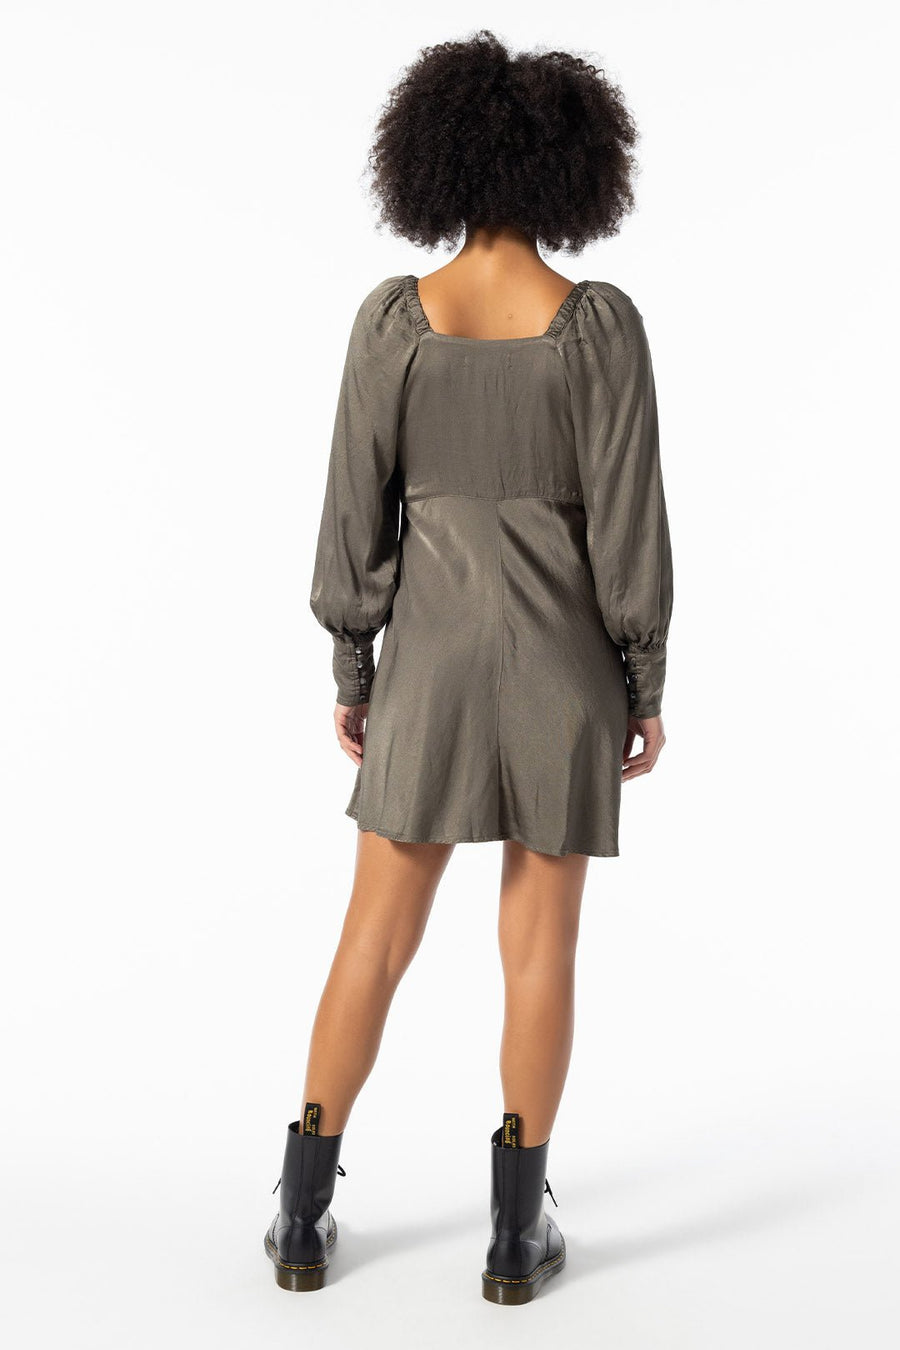 HANOVER ROMANTIC DRESS, ARMY - Burning Torch Online Boutique